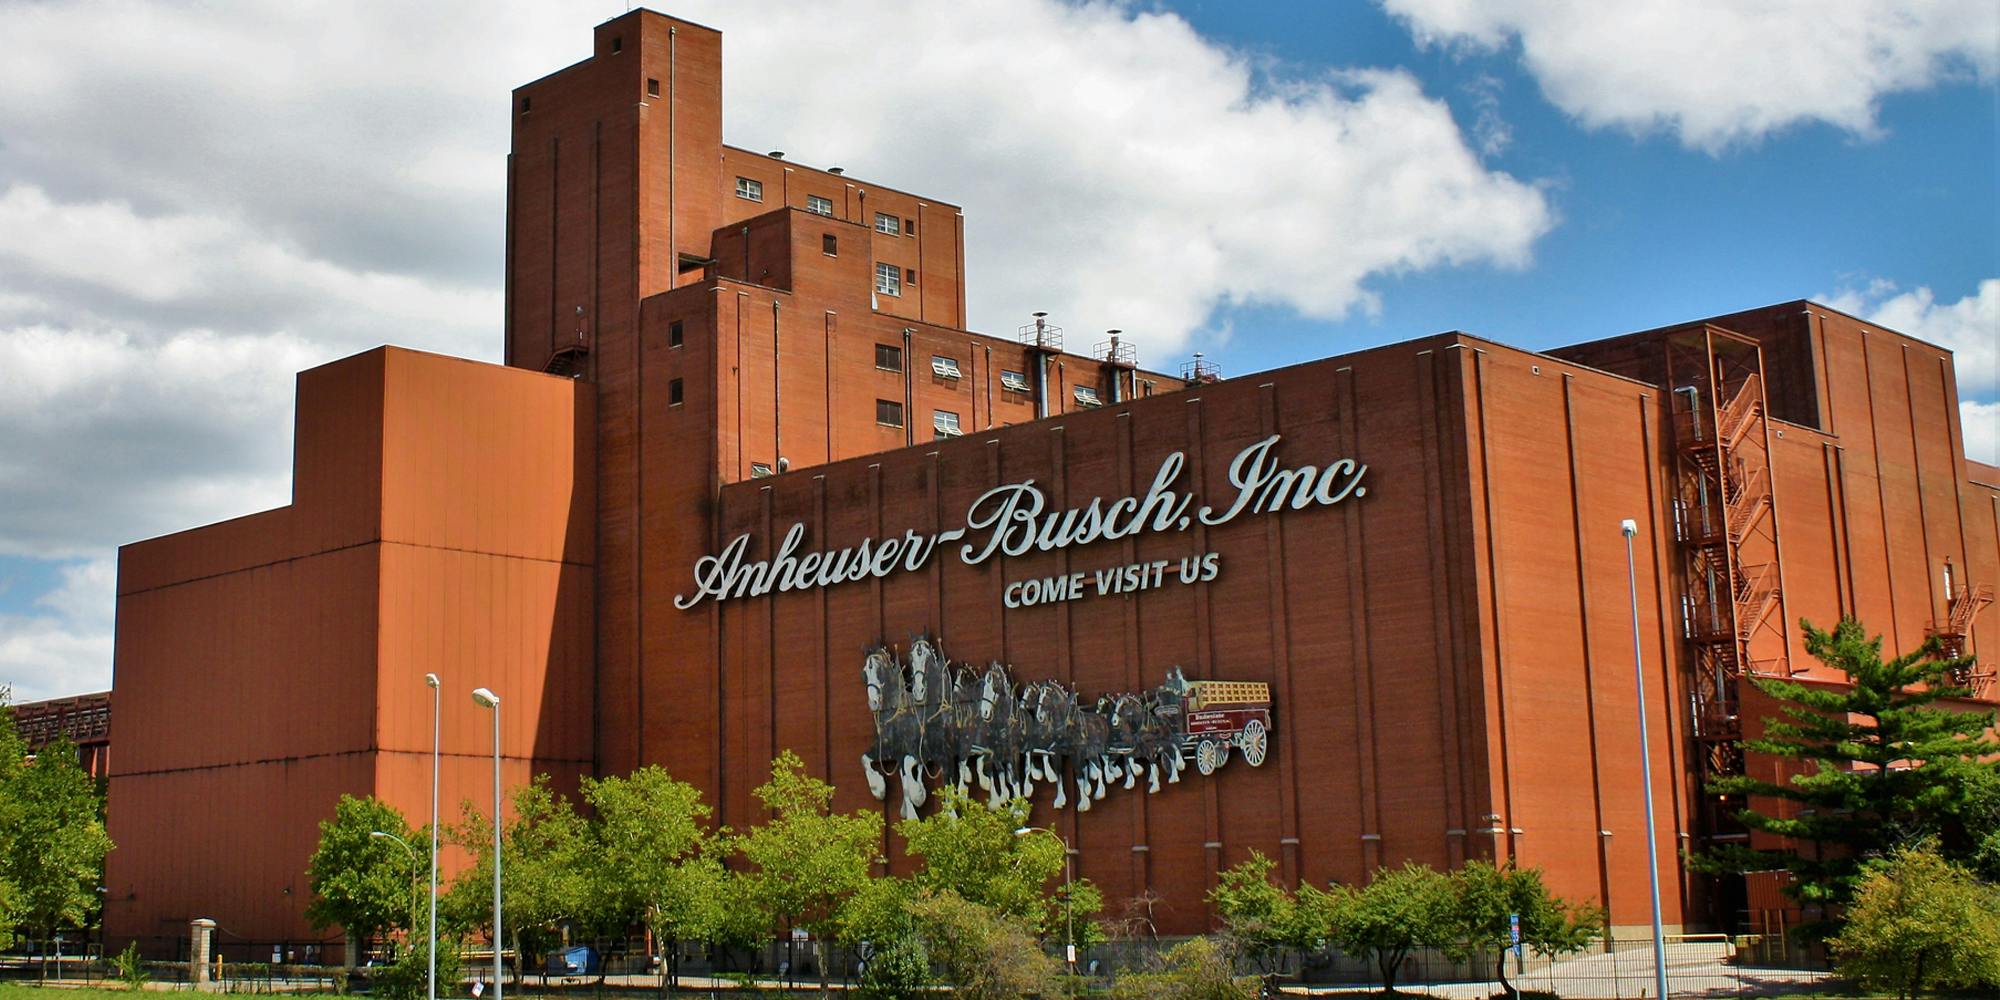 Anheuser-Busch Brewery with blue sky and sign